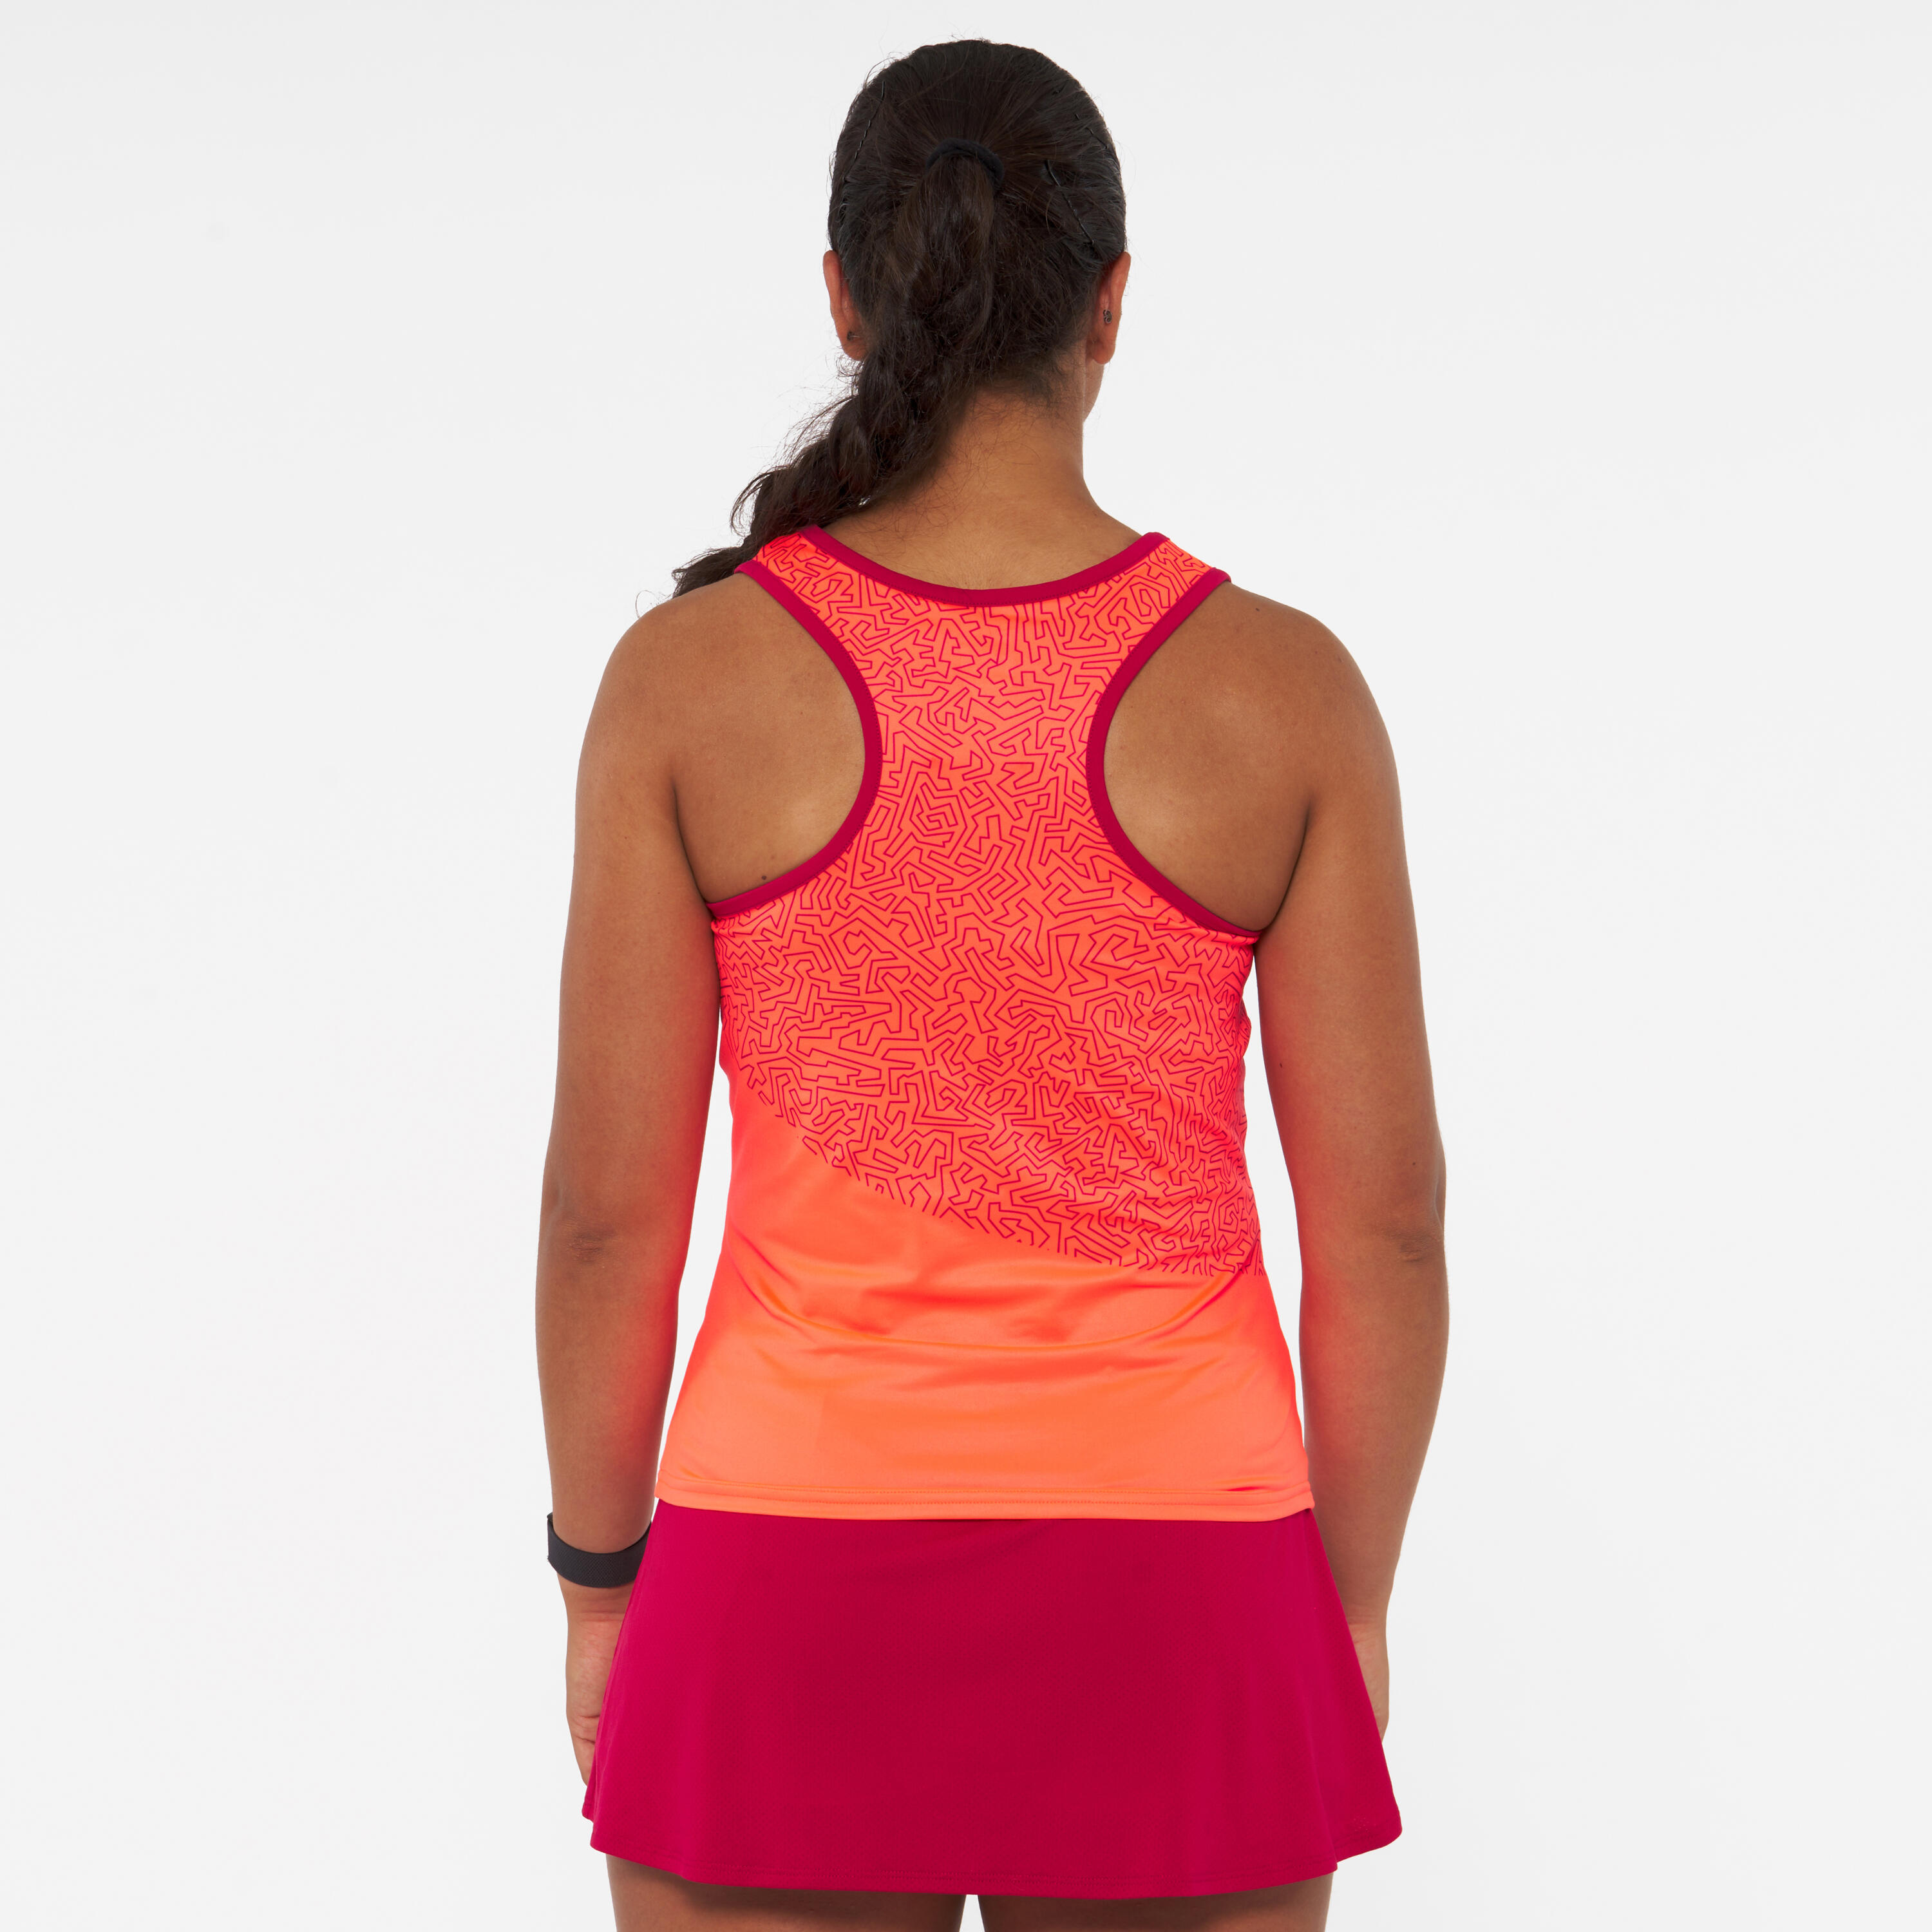 Women's Technical Breathable Padel Tank Top Dry - Red/Orange 5/7